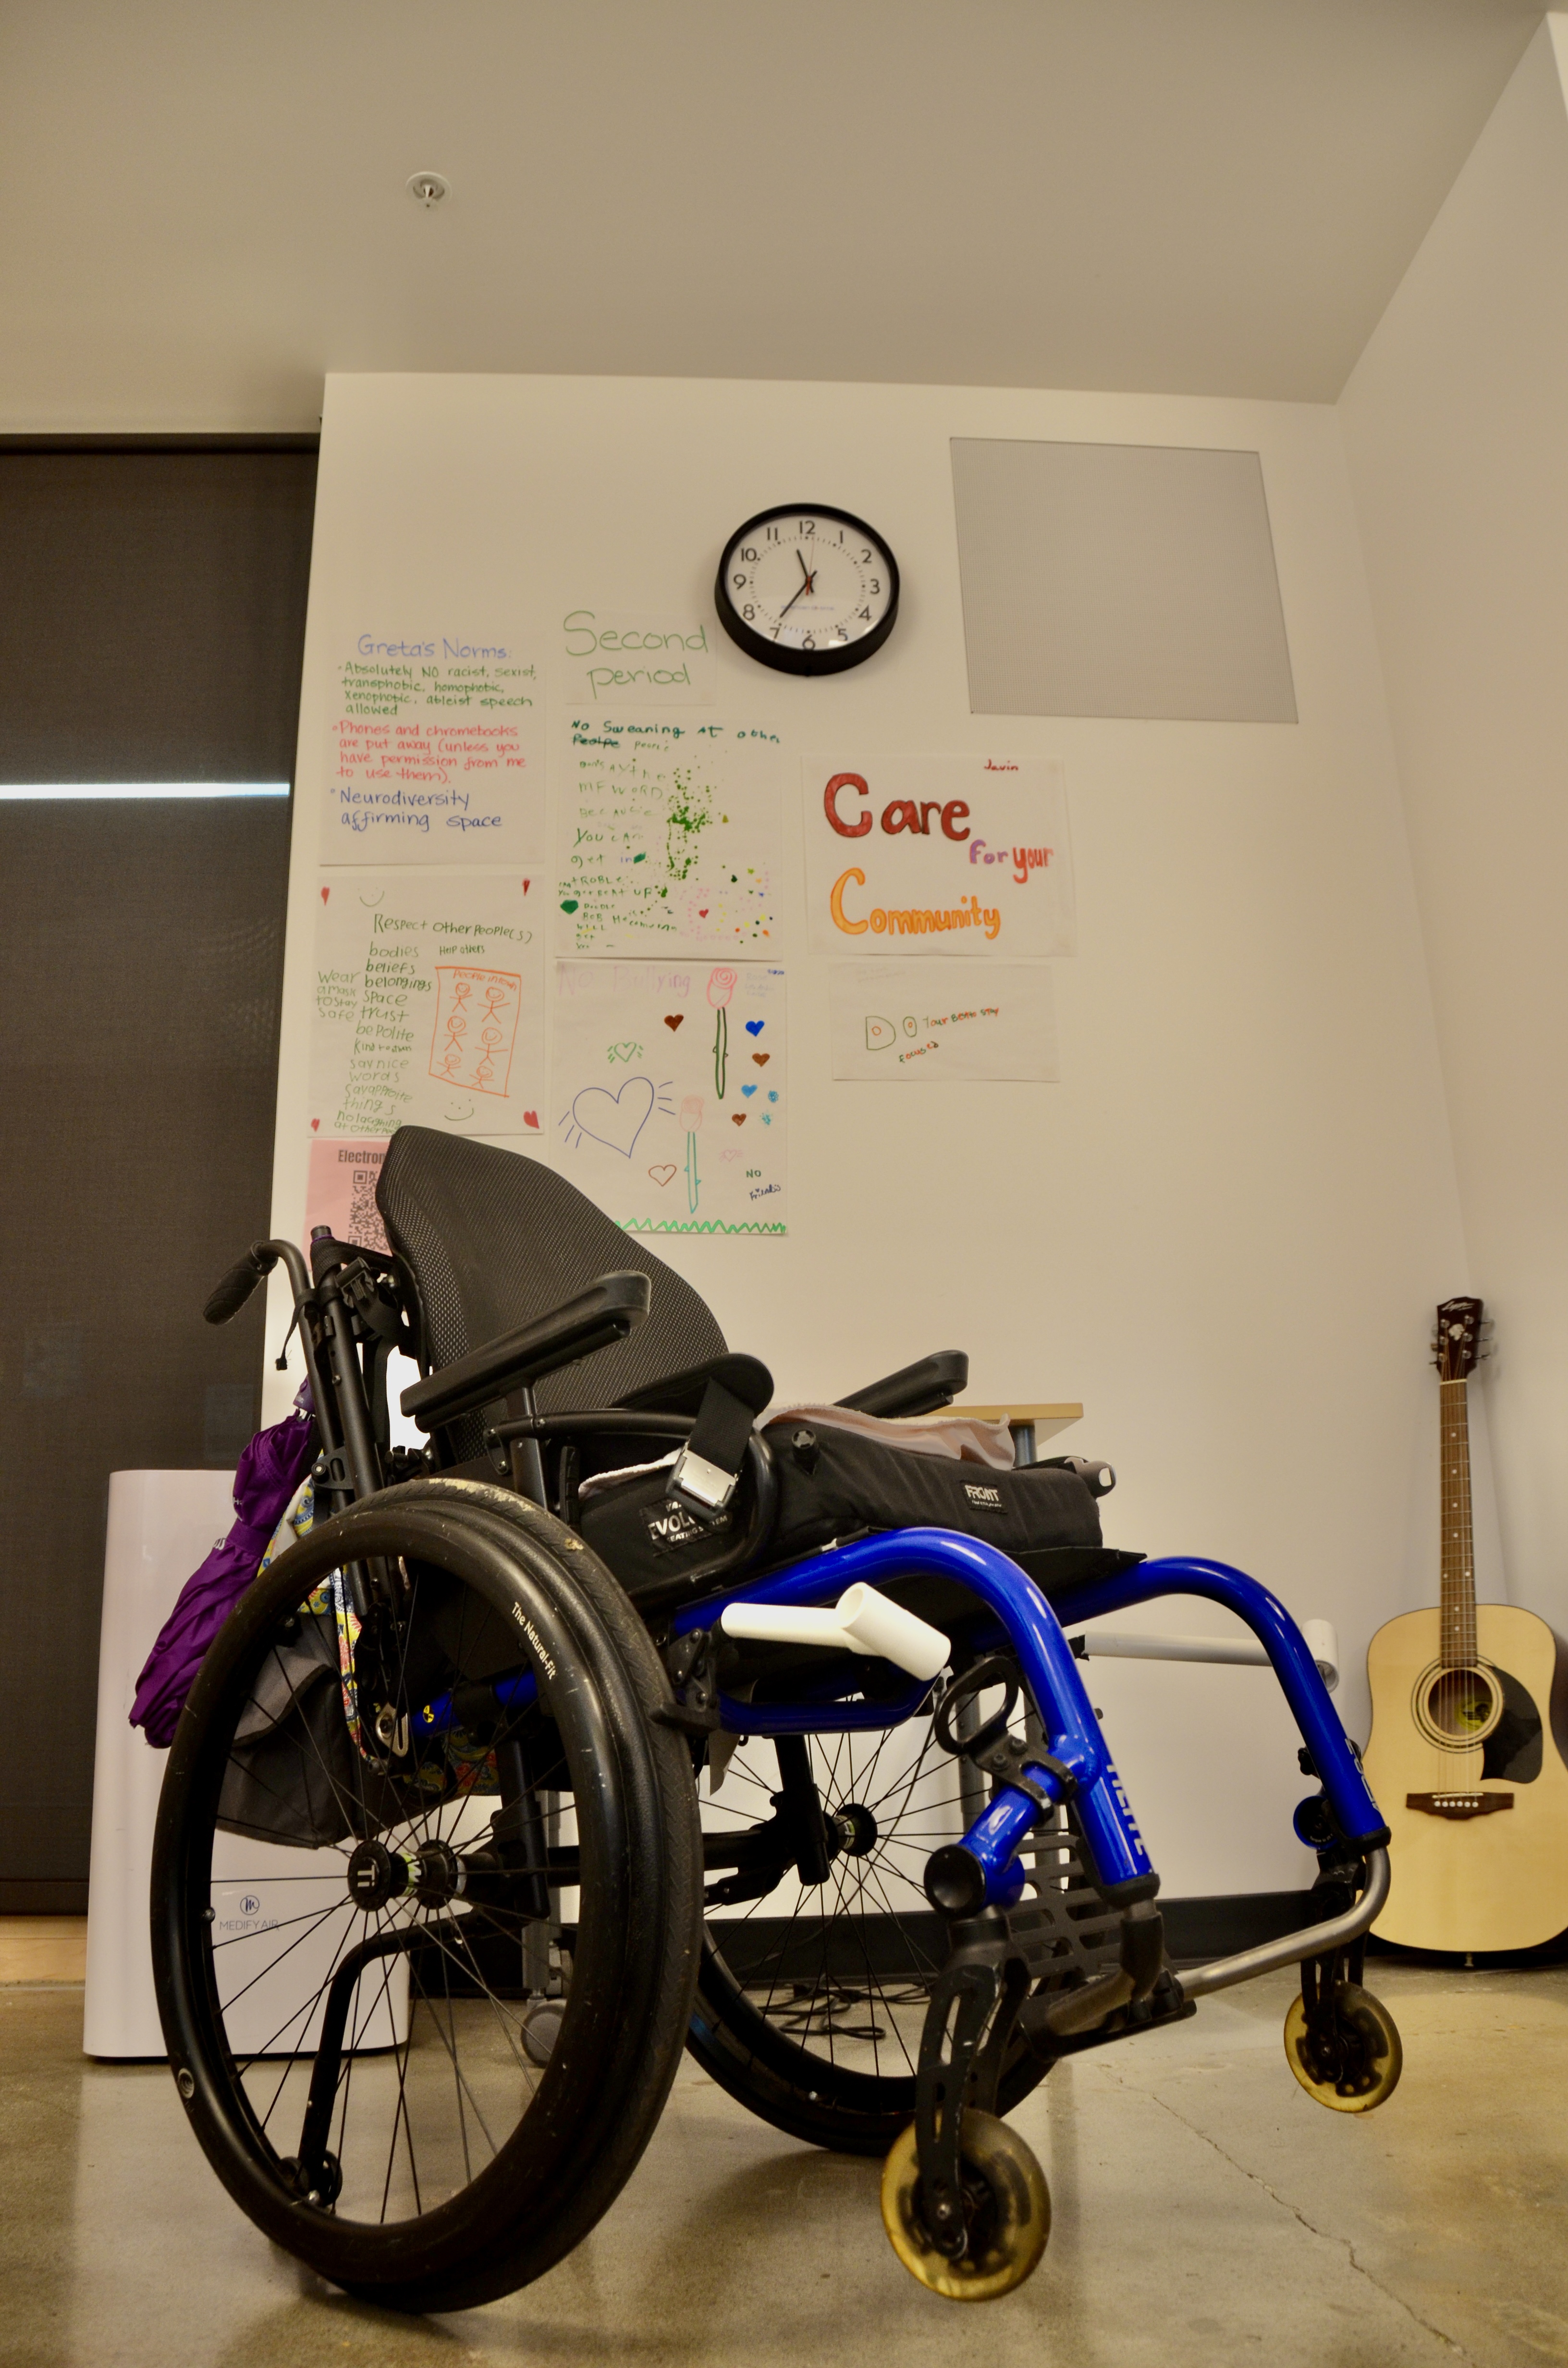 Against a white wall, a black wheelchair is set at an angle. A guitar also leans against the wall on the right side of the photo.